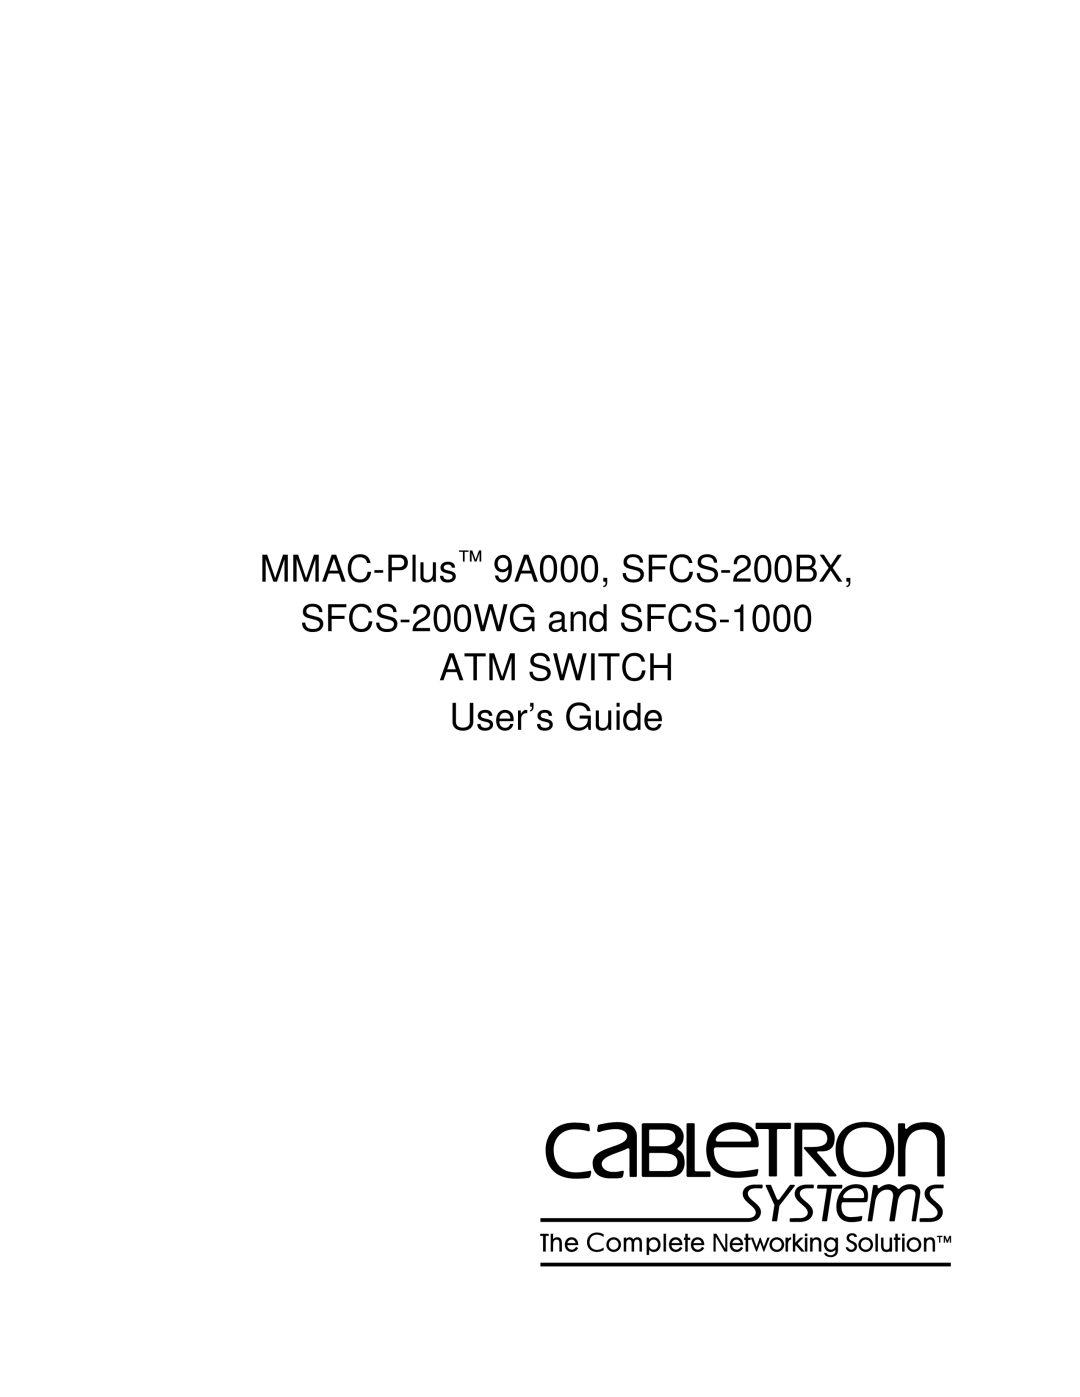 Cabletron Systems manual MMAC-Plus 9A000, SFCS-200BX, SFCS-200WG and SFCS-1000 ATM SWITCH User’s Guide 